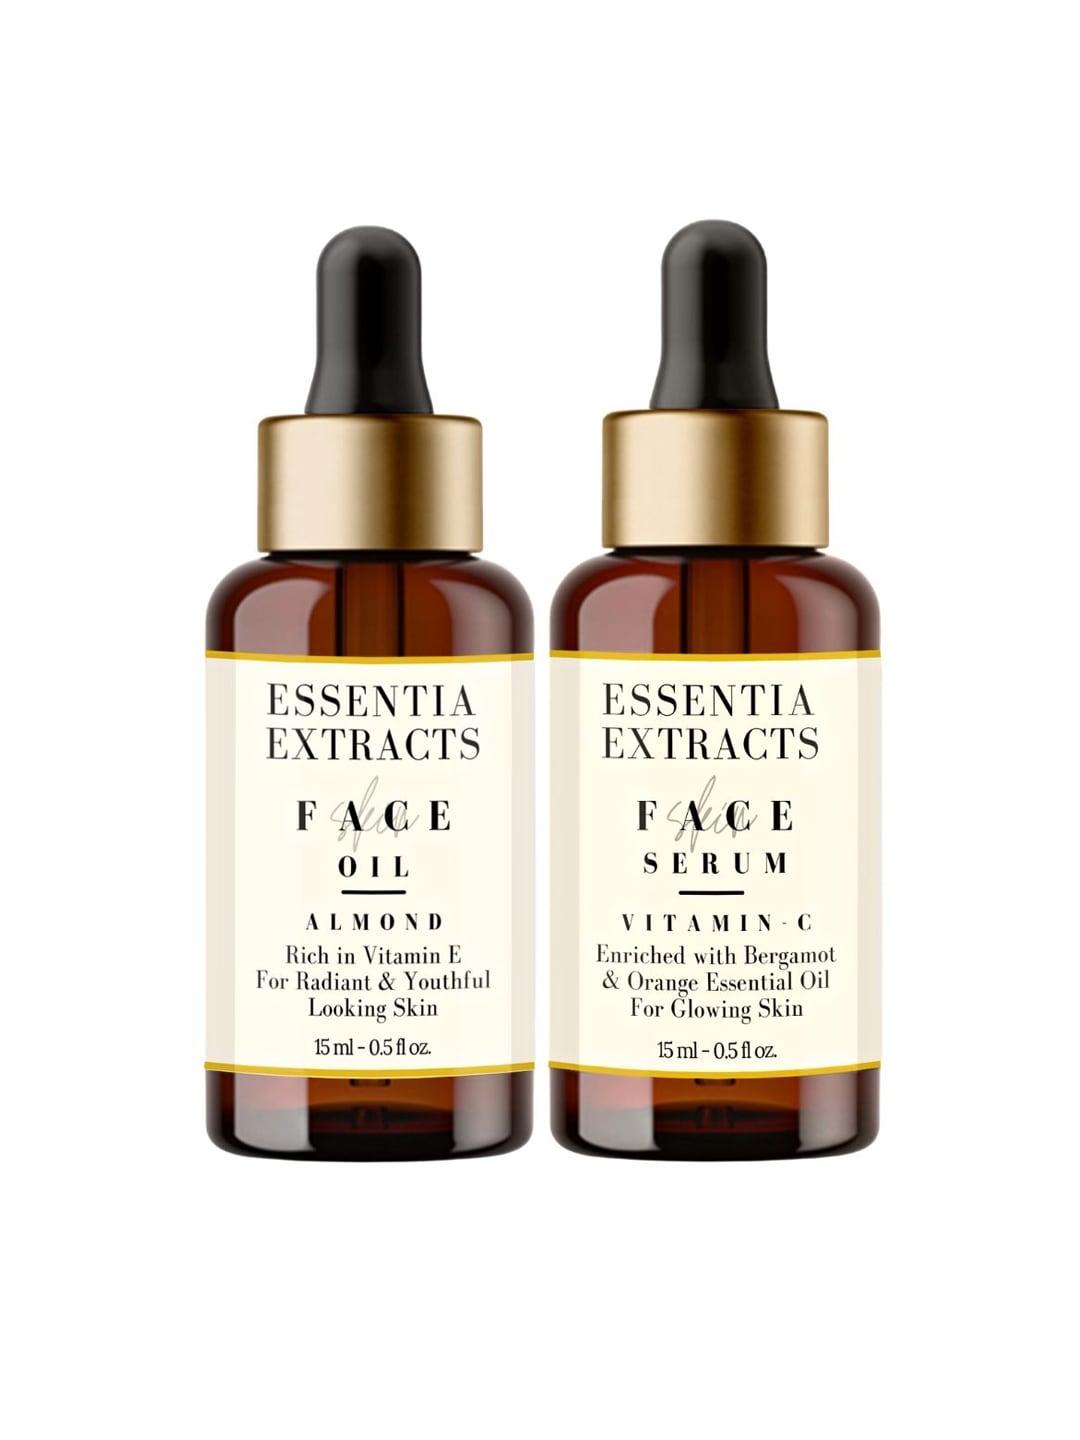 essentia extracts set of almond face oil & vitamin c face serum - 15 ml each